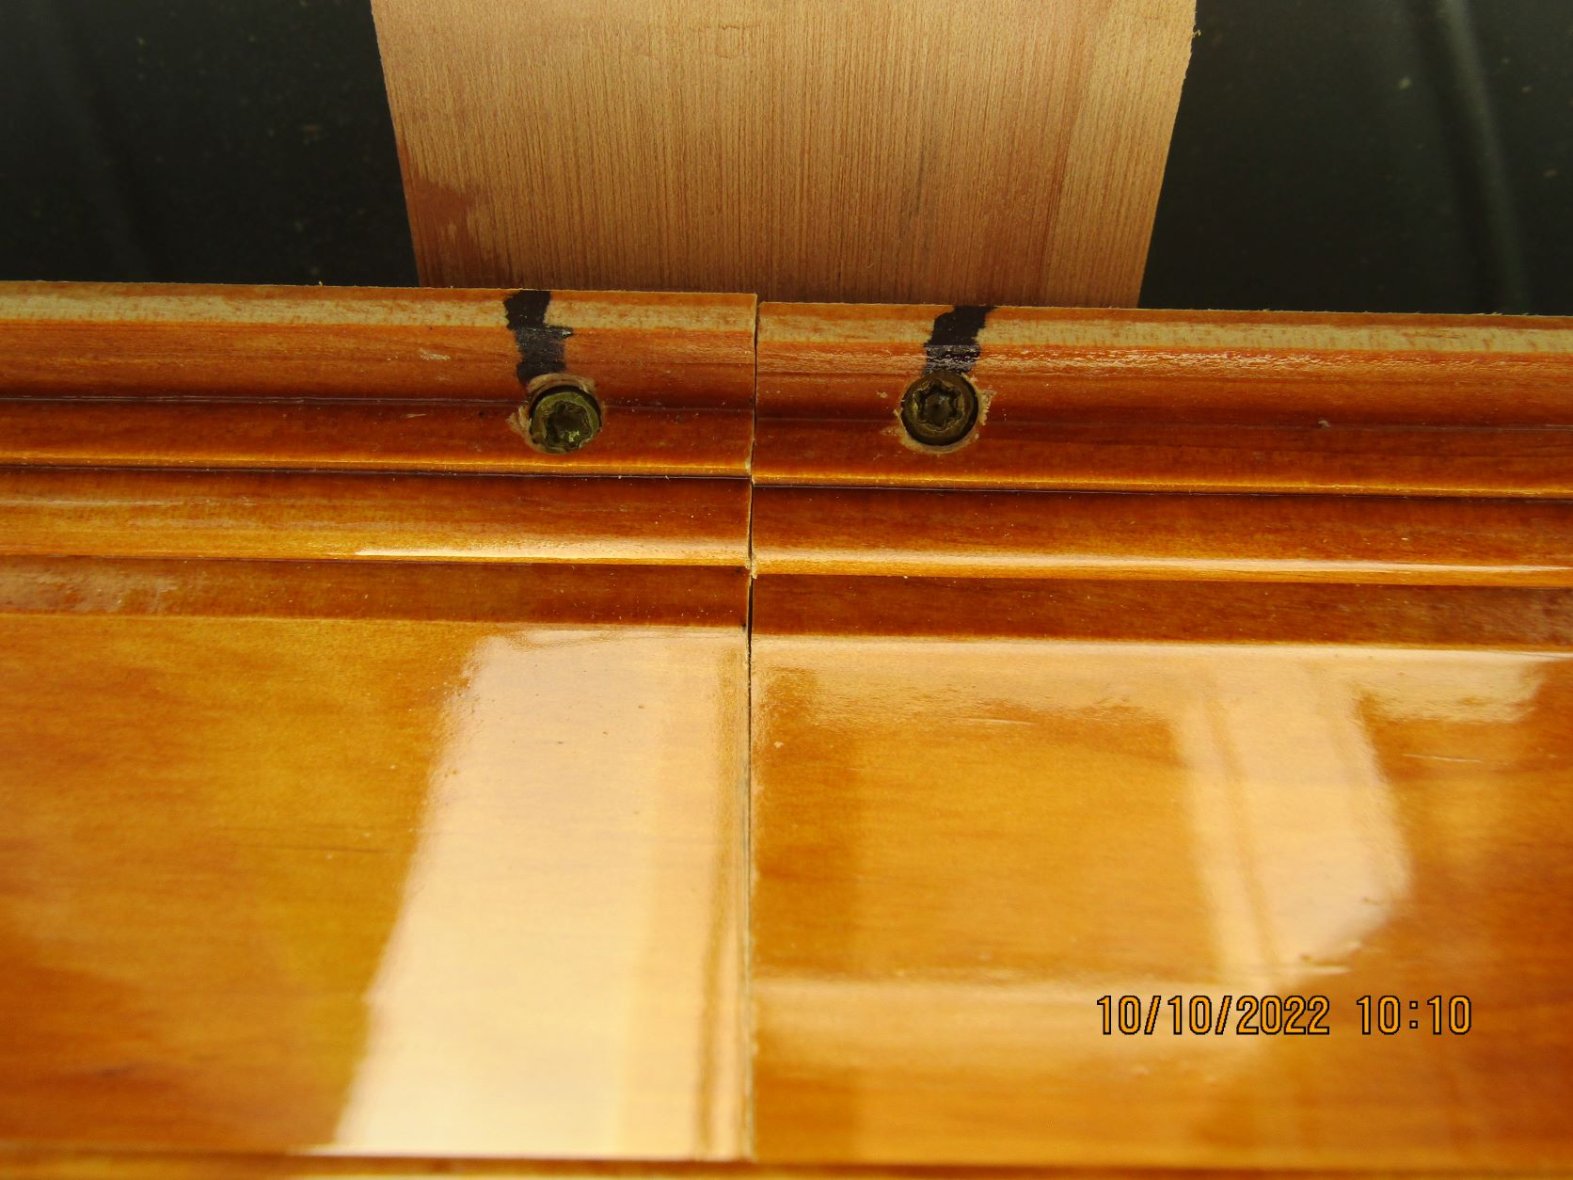 Screws helped to adjust board-to-board fit